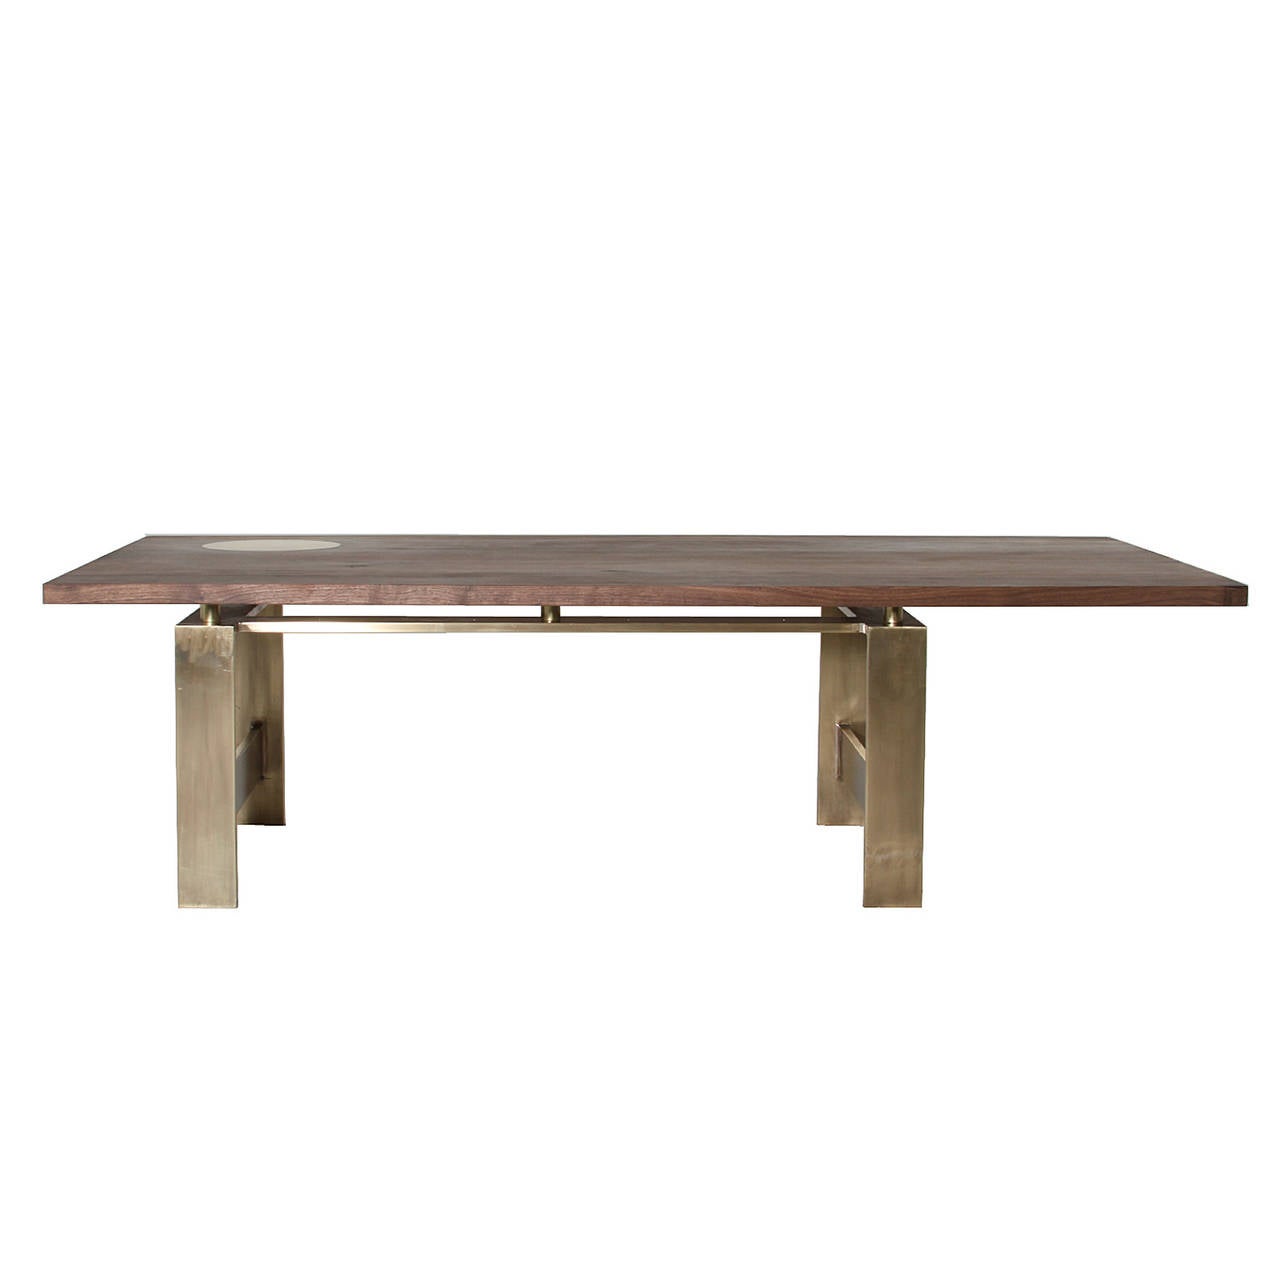 A custom stylish, asymmetrical coffee table by Tracy Hayes for Thomas Hayes Studio featuring a brass base and cantilevered, oil-finished walnut top. Walnut top features an inlay of solid brass in a perfect circle.

This item is available for